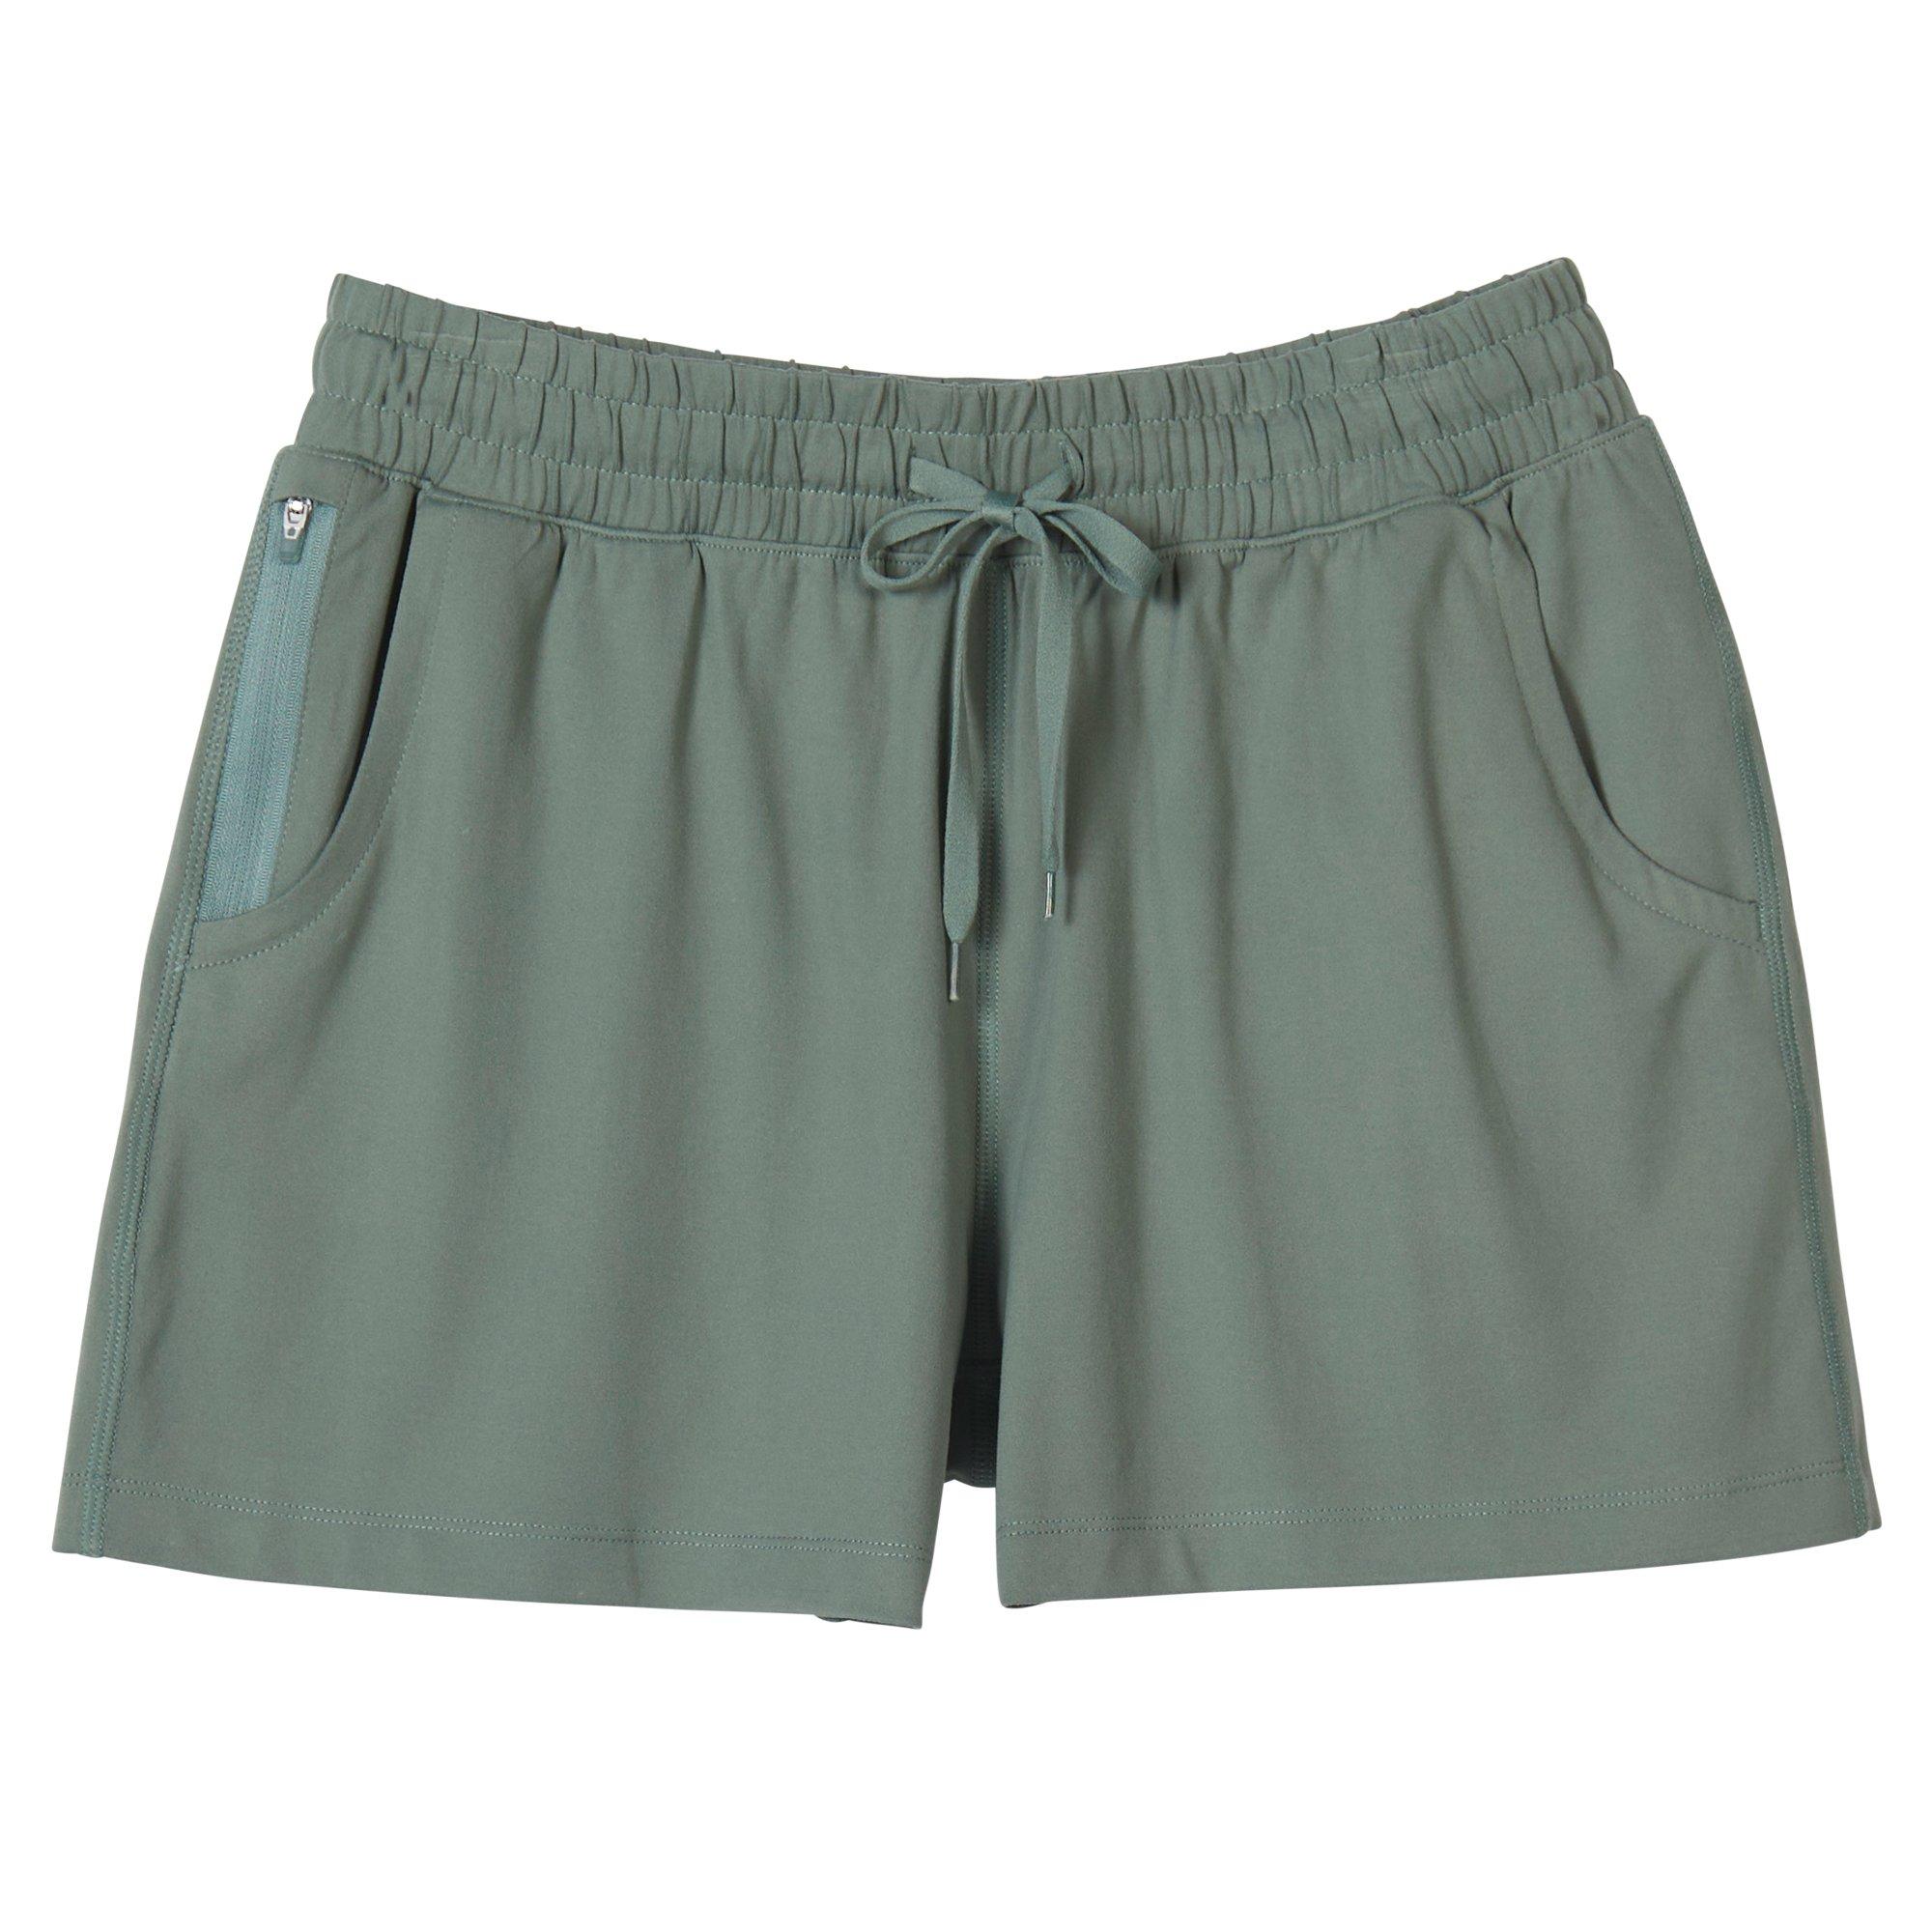 Reel Legends Womens Solid Mana Shorts - Olive Green - X-Large